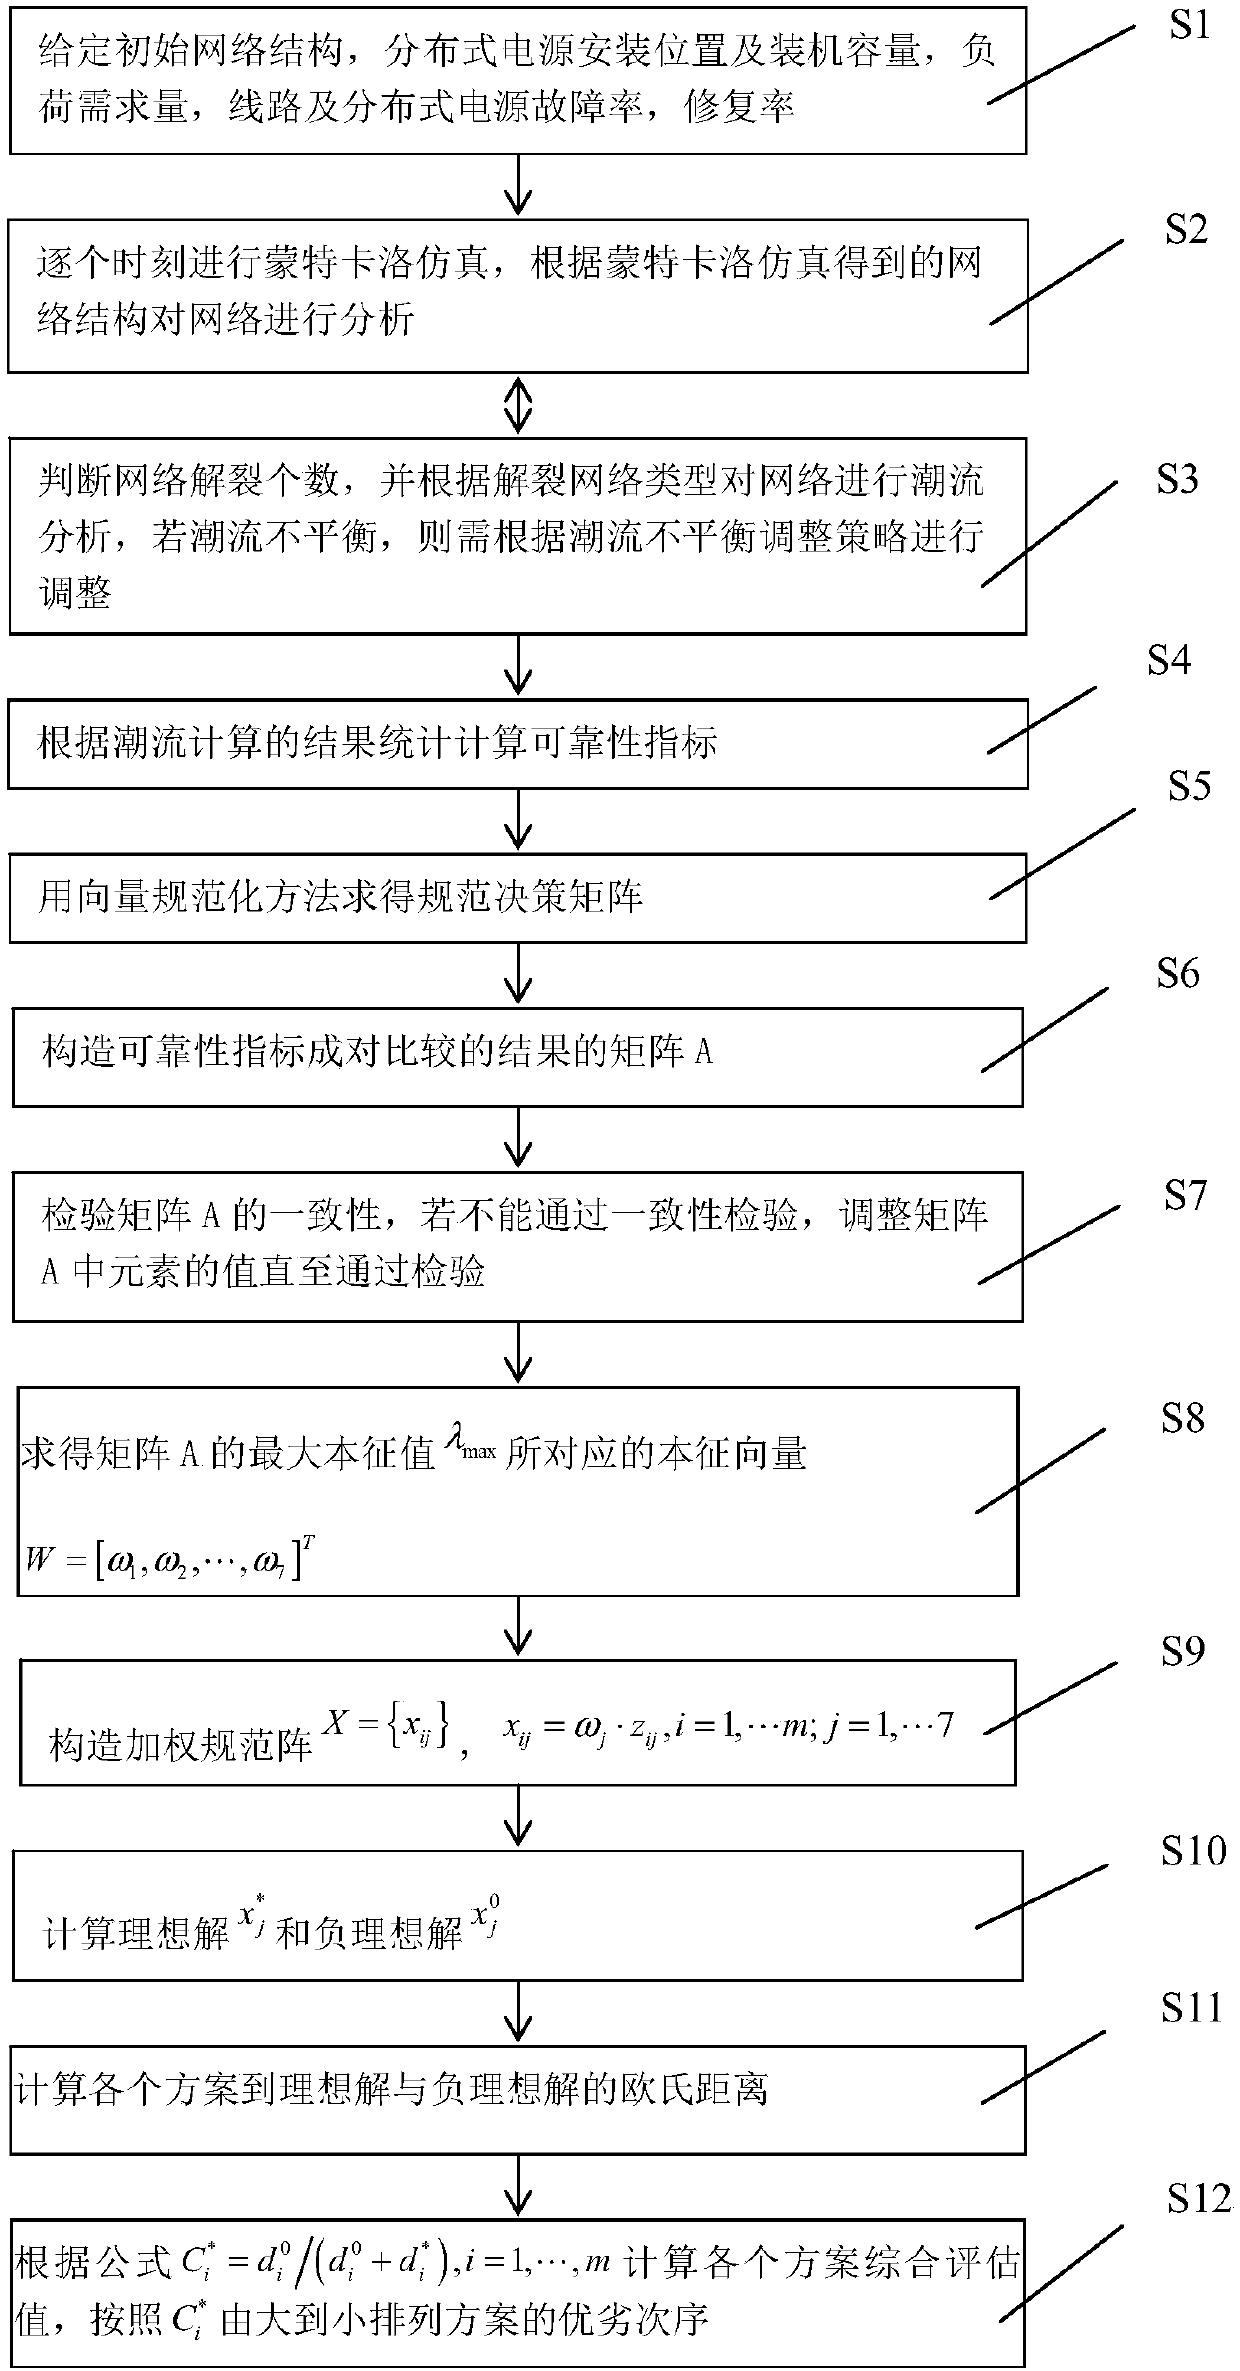 Reliability evaluation method of active power distribution network with distributed power supply based on TOPSIS method